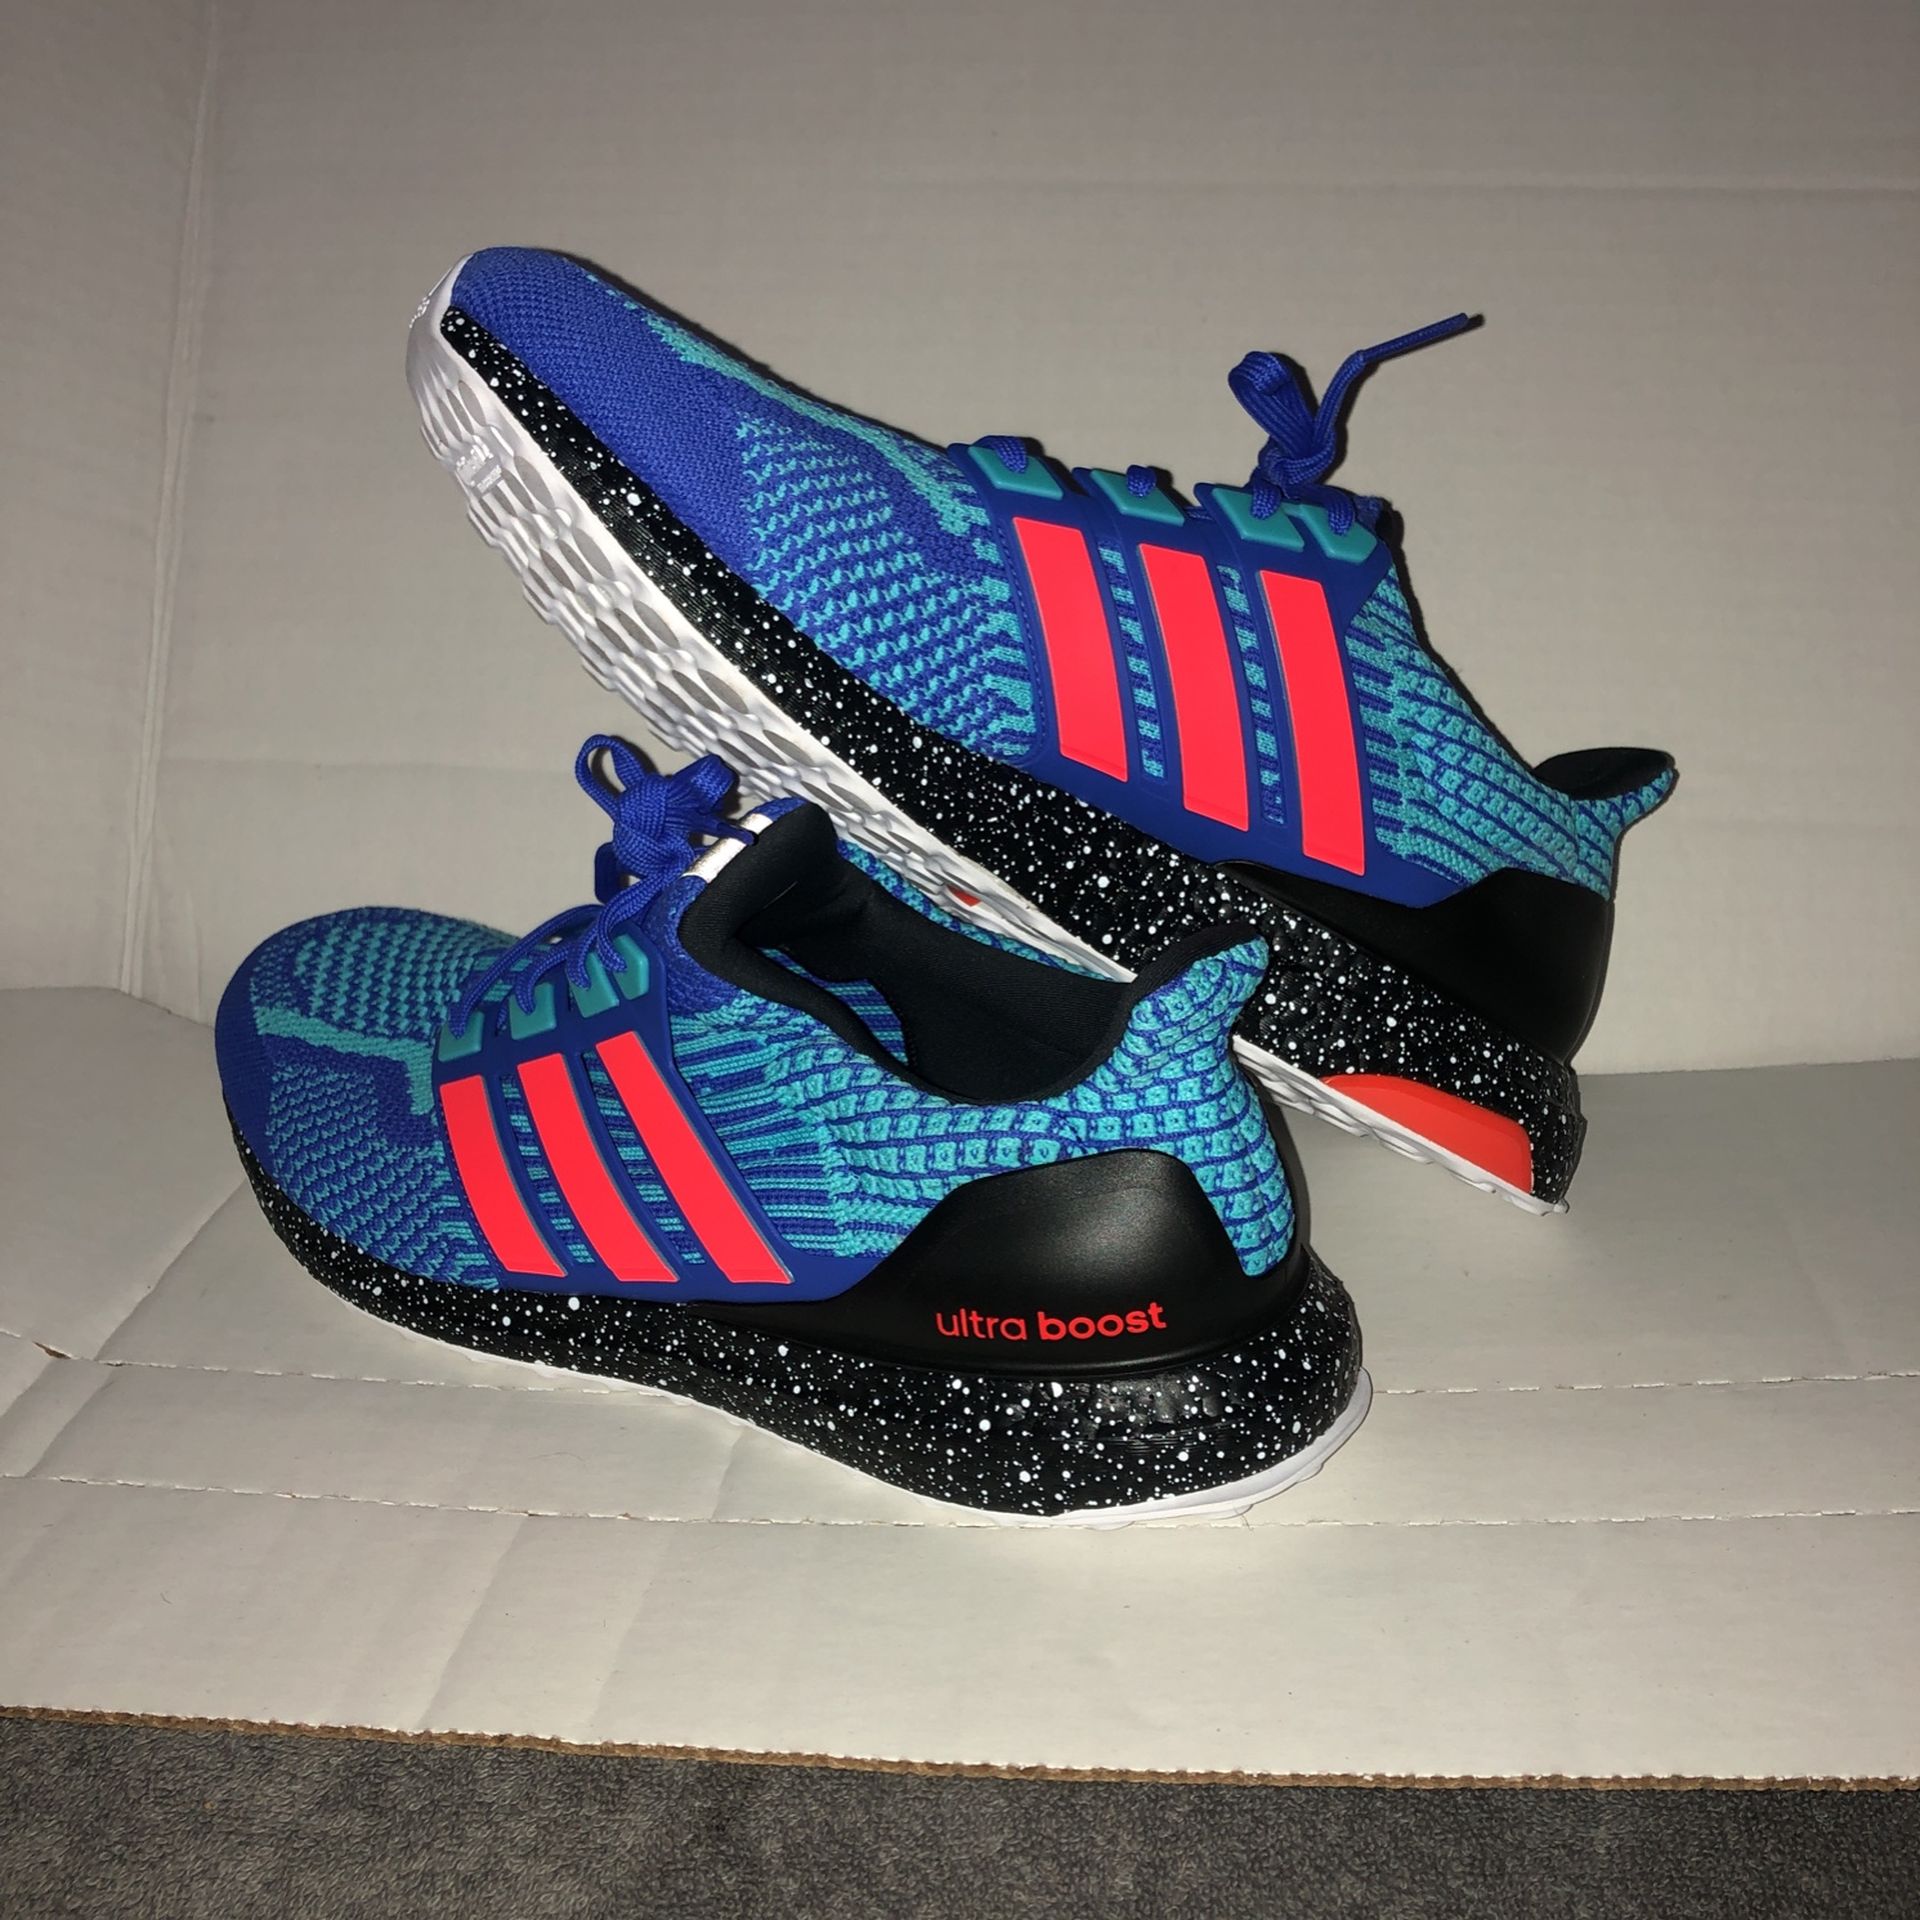 Adidas / Ultra Boost 5.0 DNA / Prime Blue